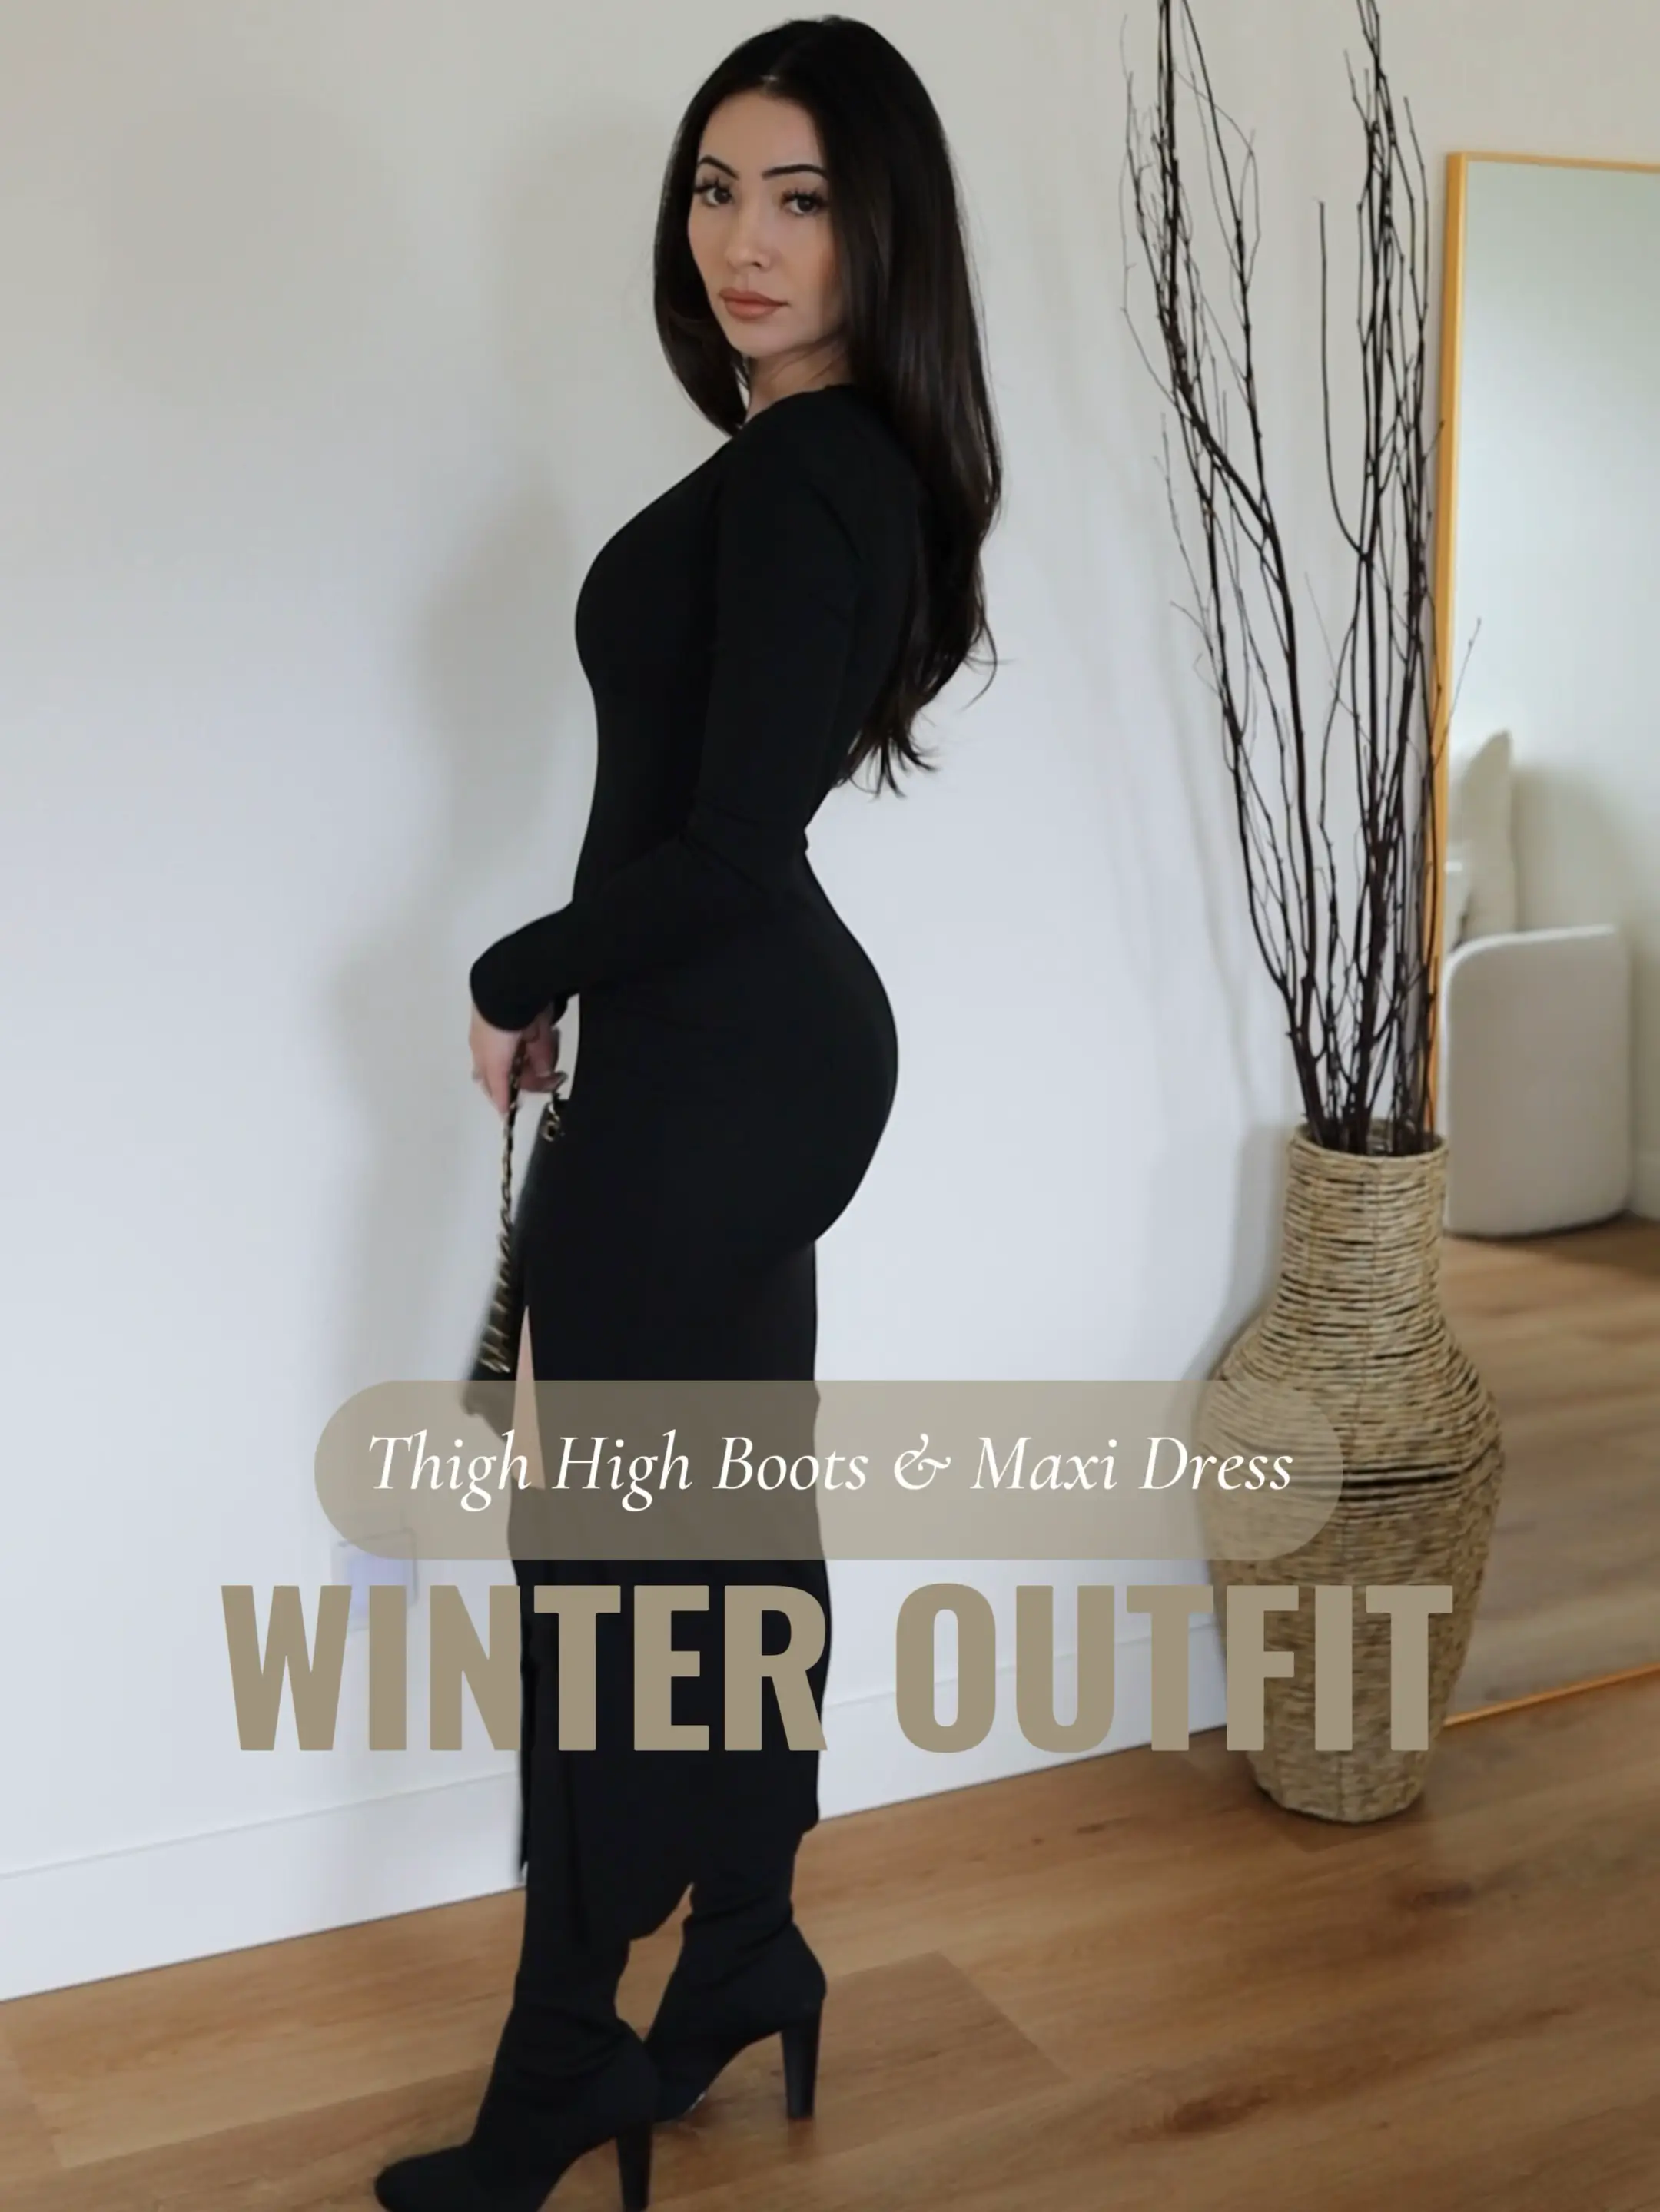 Thigh high boots and maxi dress winter outfit ⛄️, Video published by Dr.  Clarissa